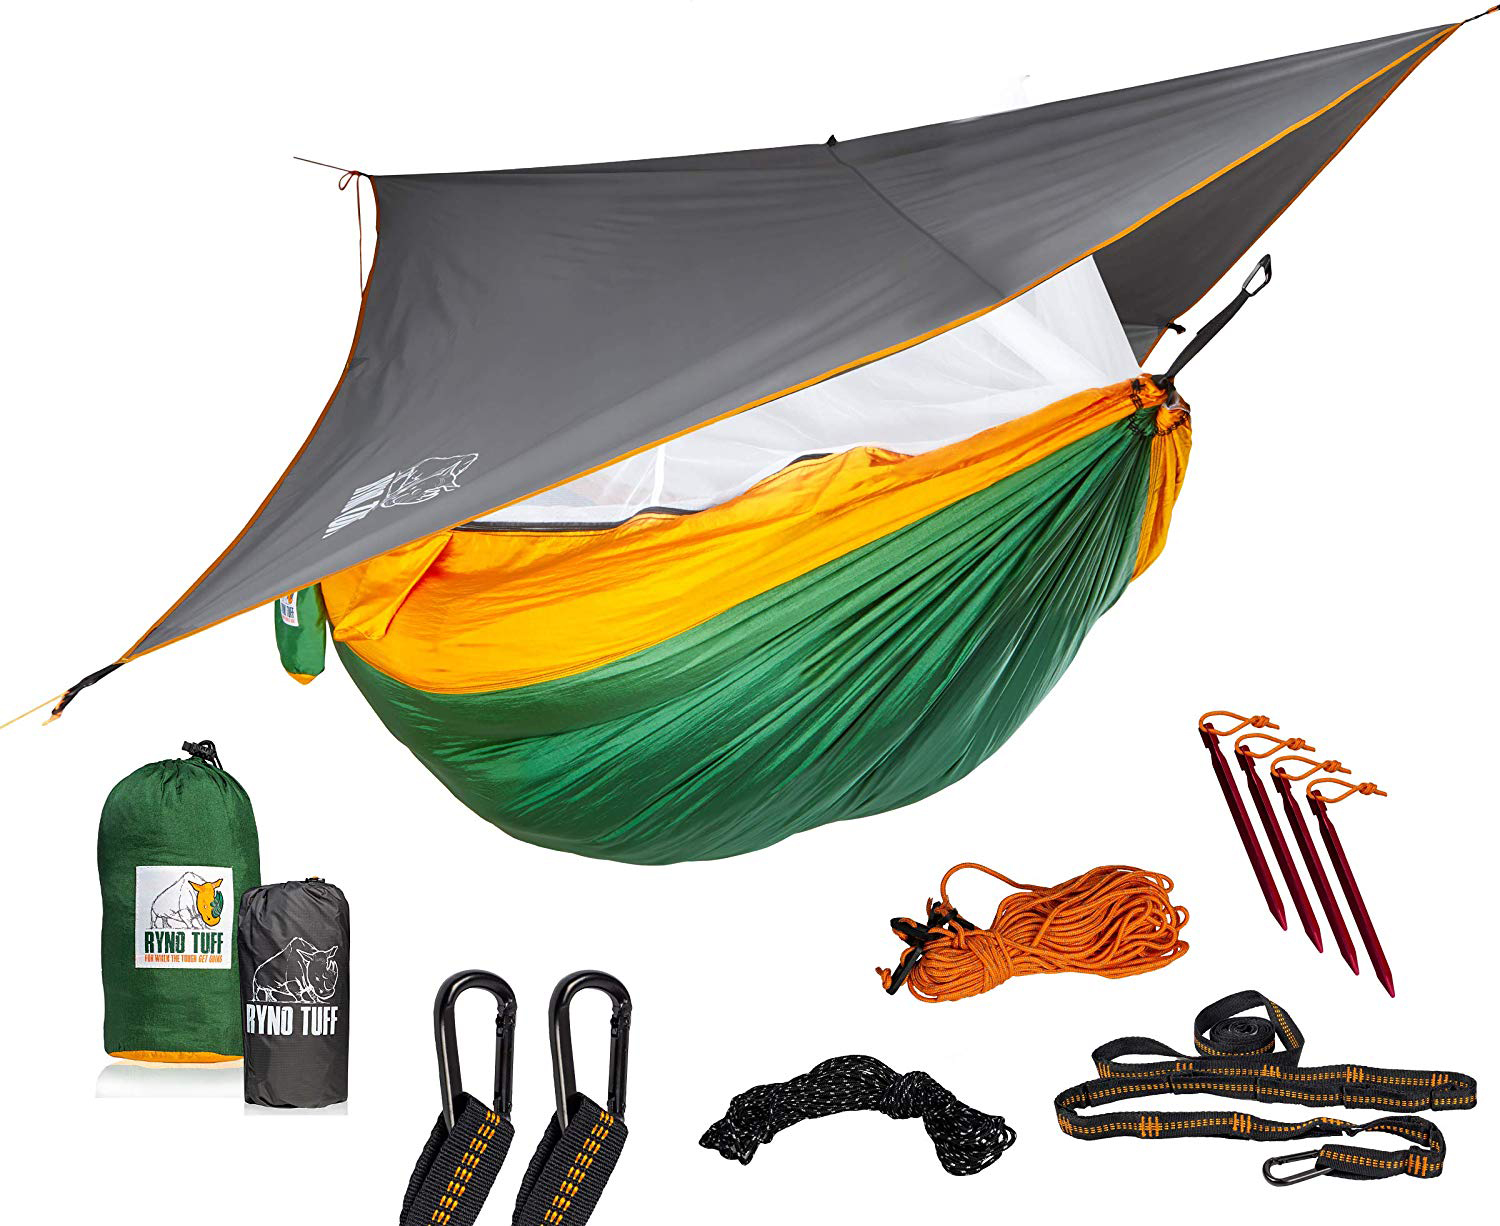 Double Hammock with Bug Net and Tarp, Reinforced Not to Tear But Still Lightweight, Extra Pocket